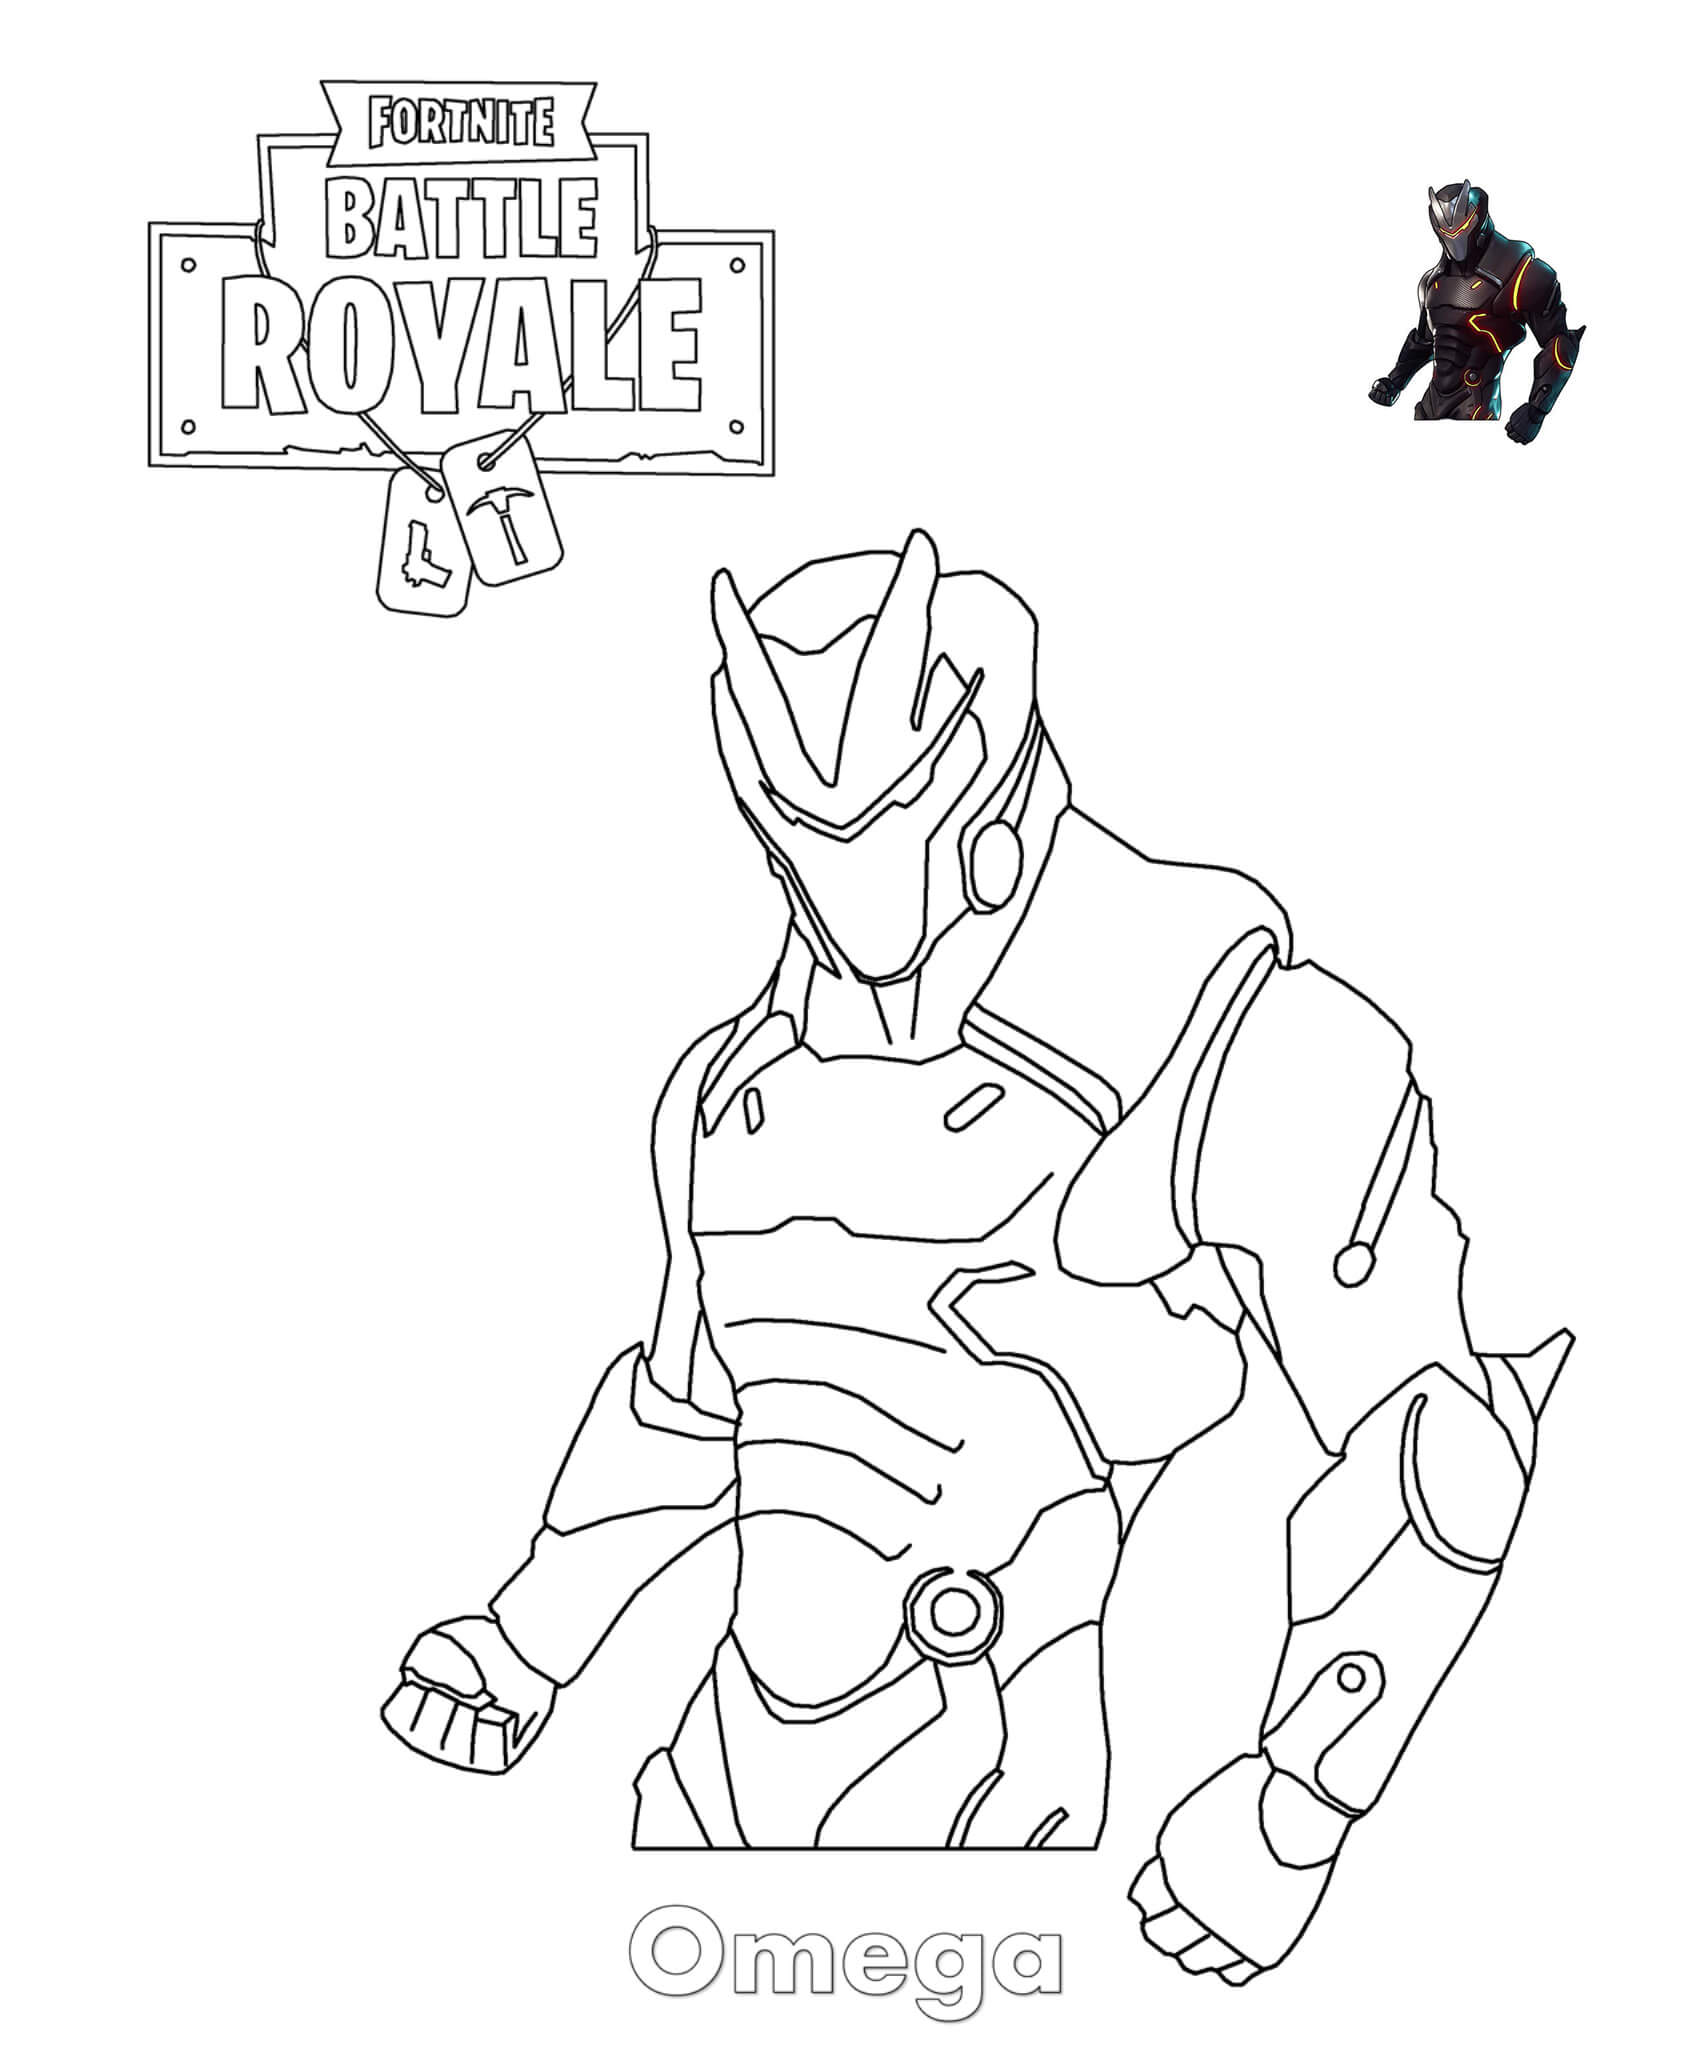 Omega Fortnite Coloring Page